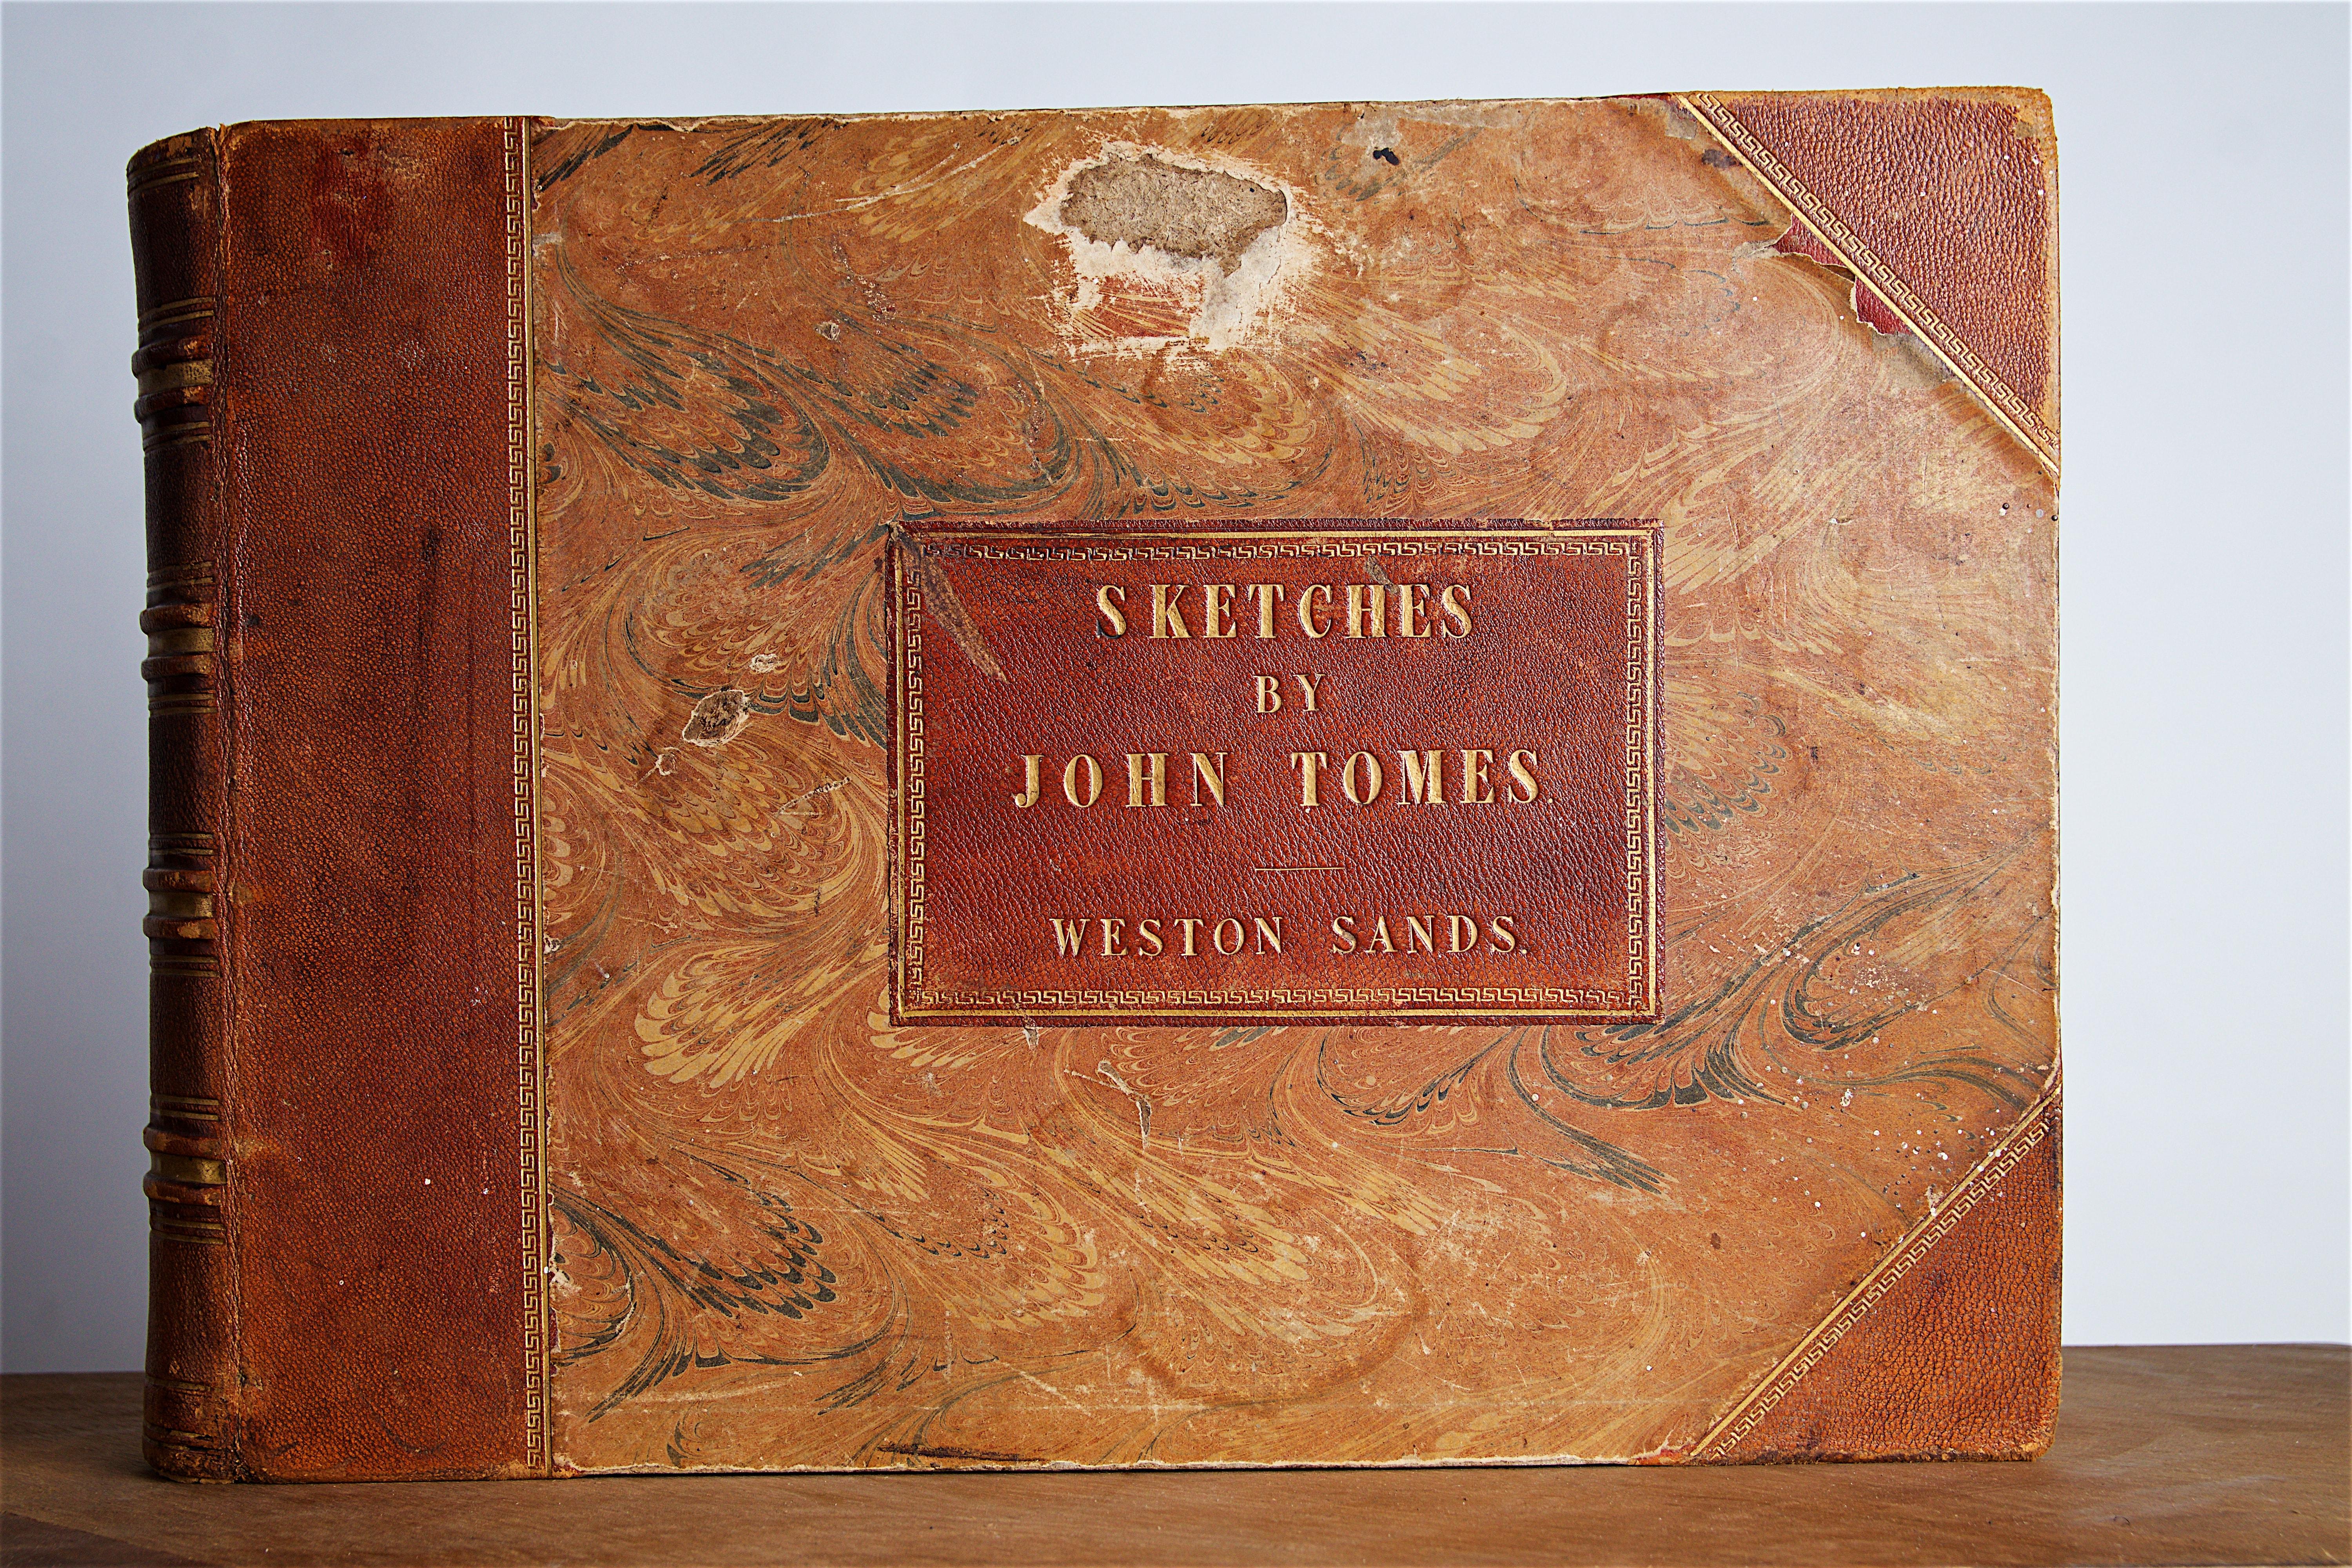 English Album of 19th Century Watercolor Paintings by John Tomes